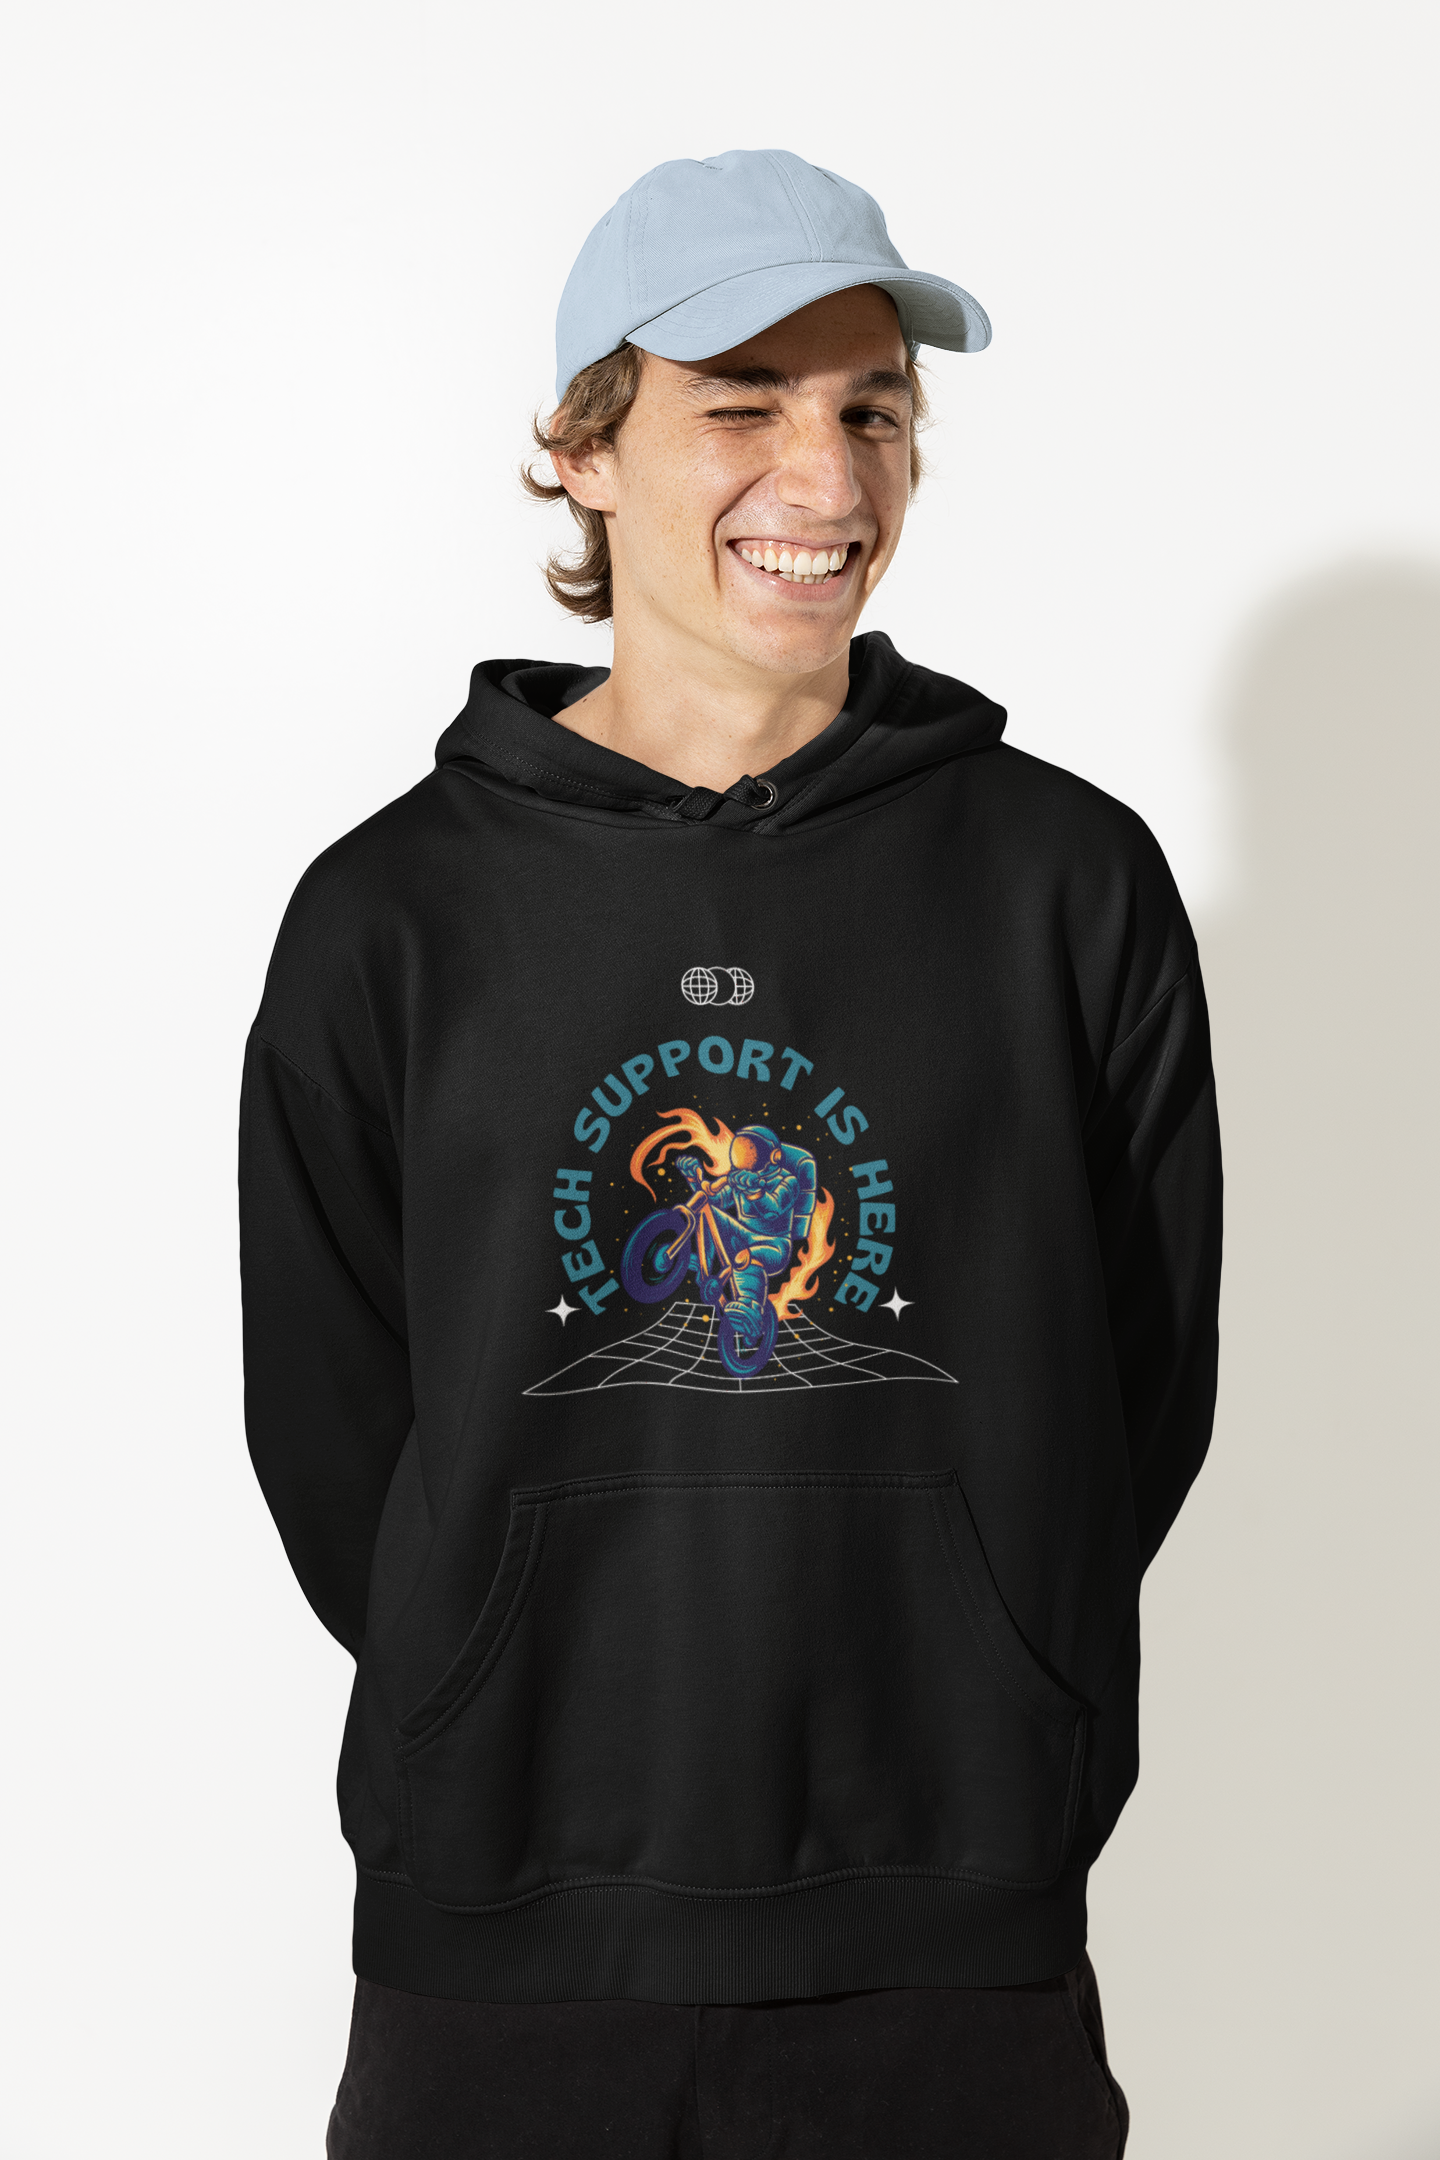 Tech Support Hoodie